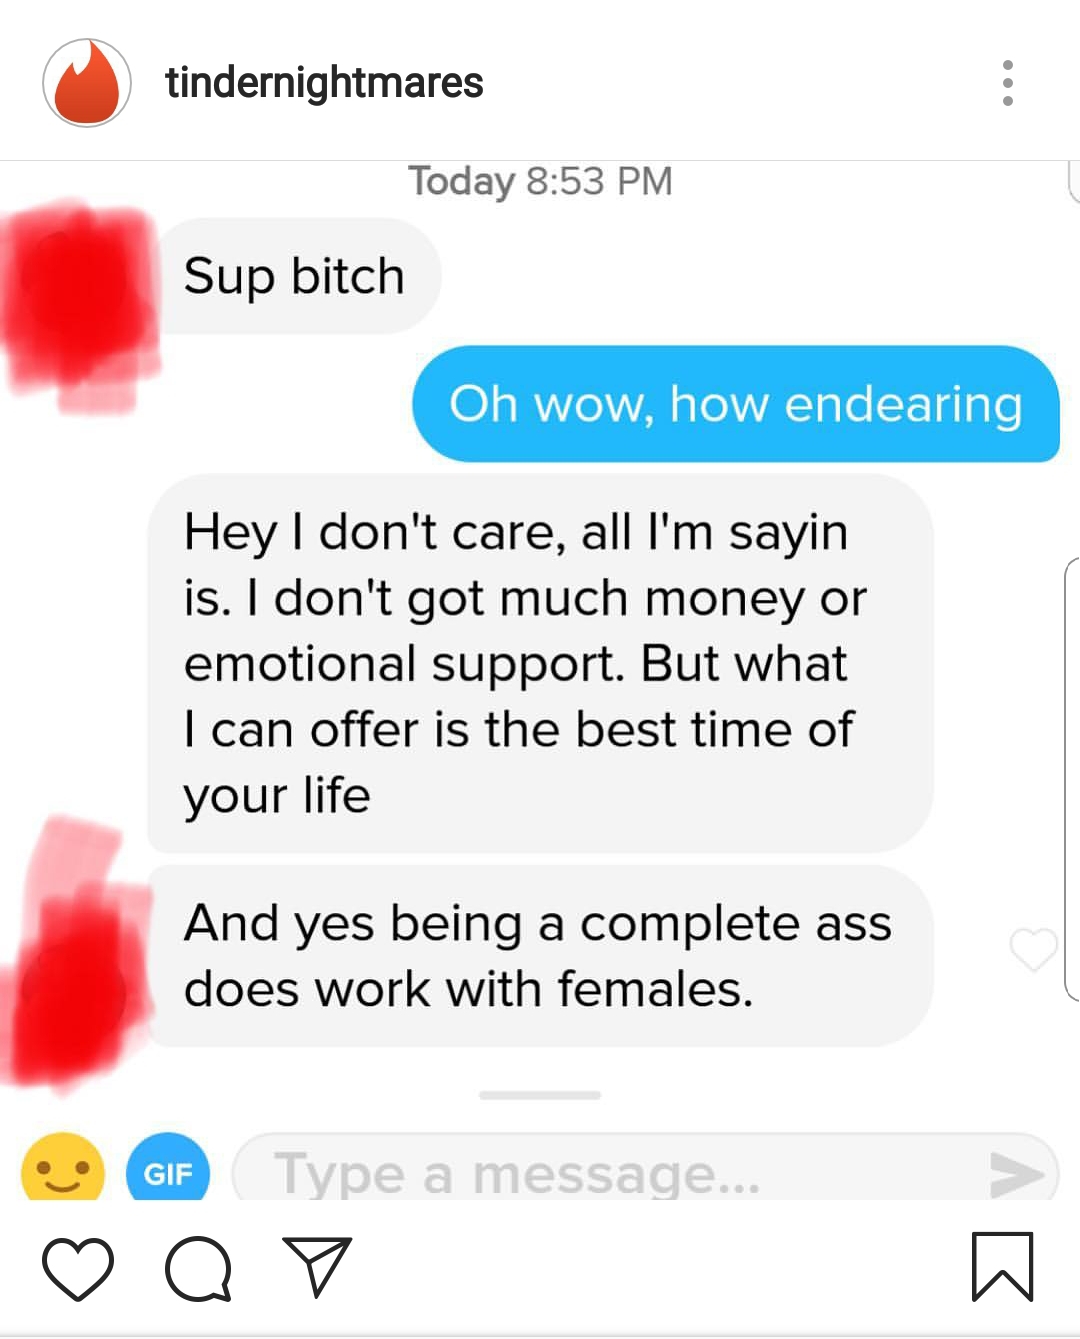 memes - point - tindernightmares Today Sup bitch Oh wow, how endearing Hey I don't care, all I'm sayin is. I don't got much money or emotional support. But what I can offer is the best time of your life And yes being a complete ass does work with females.